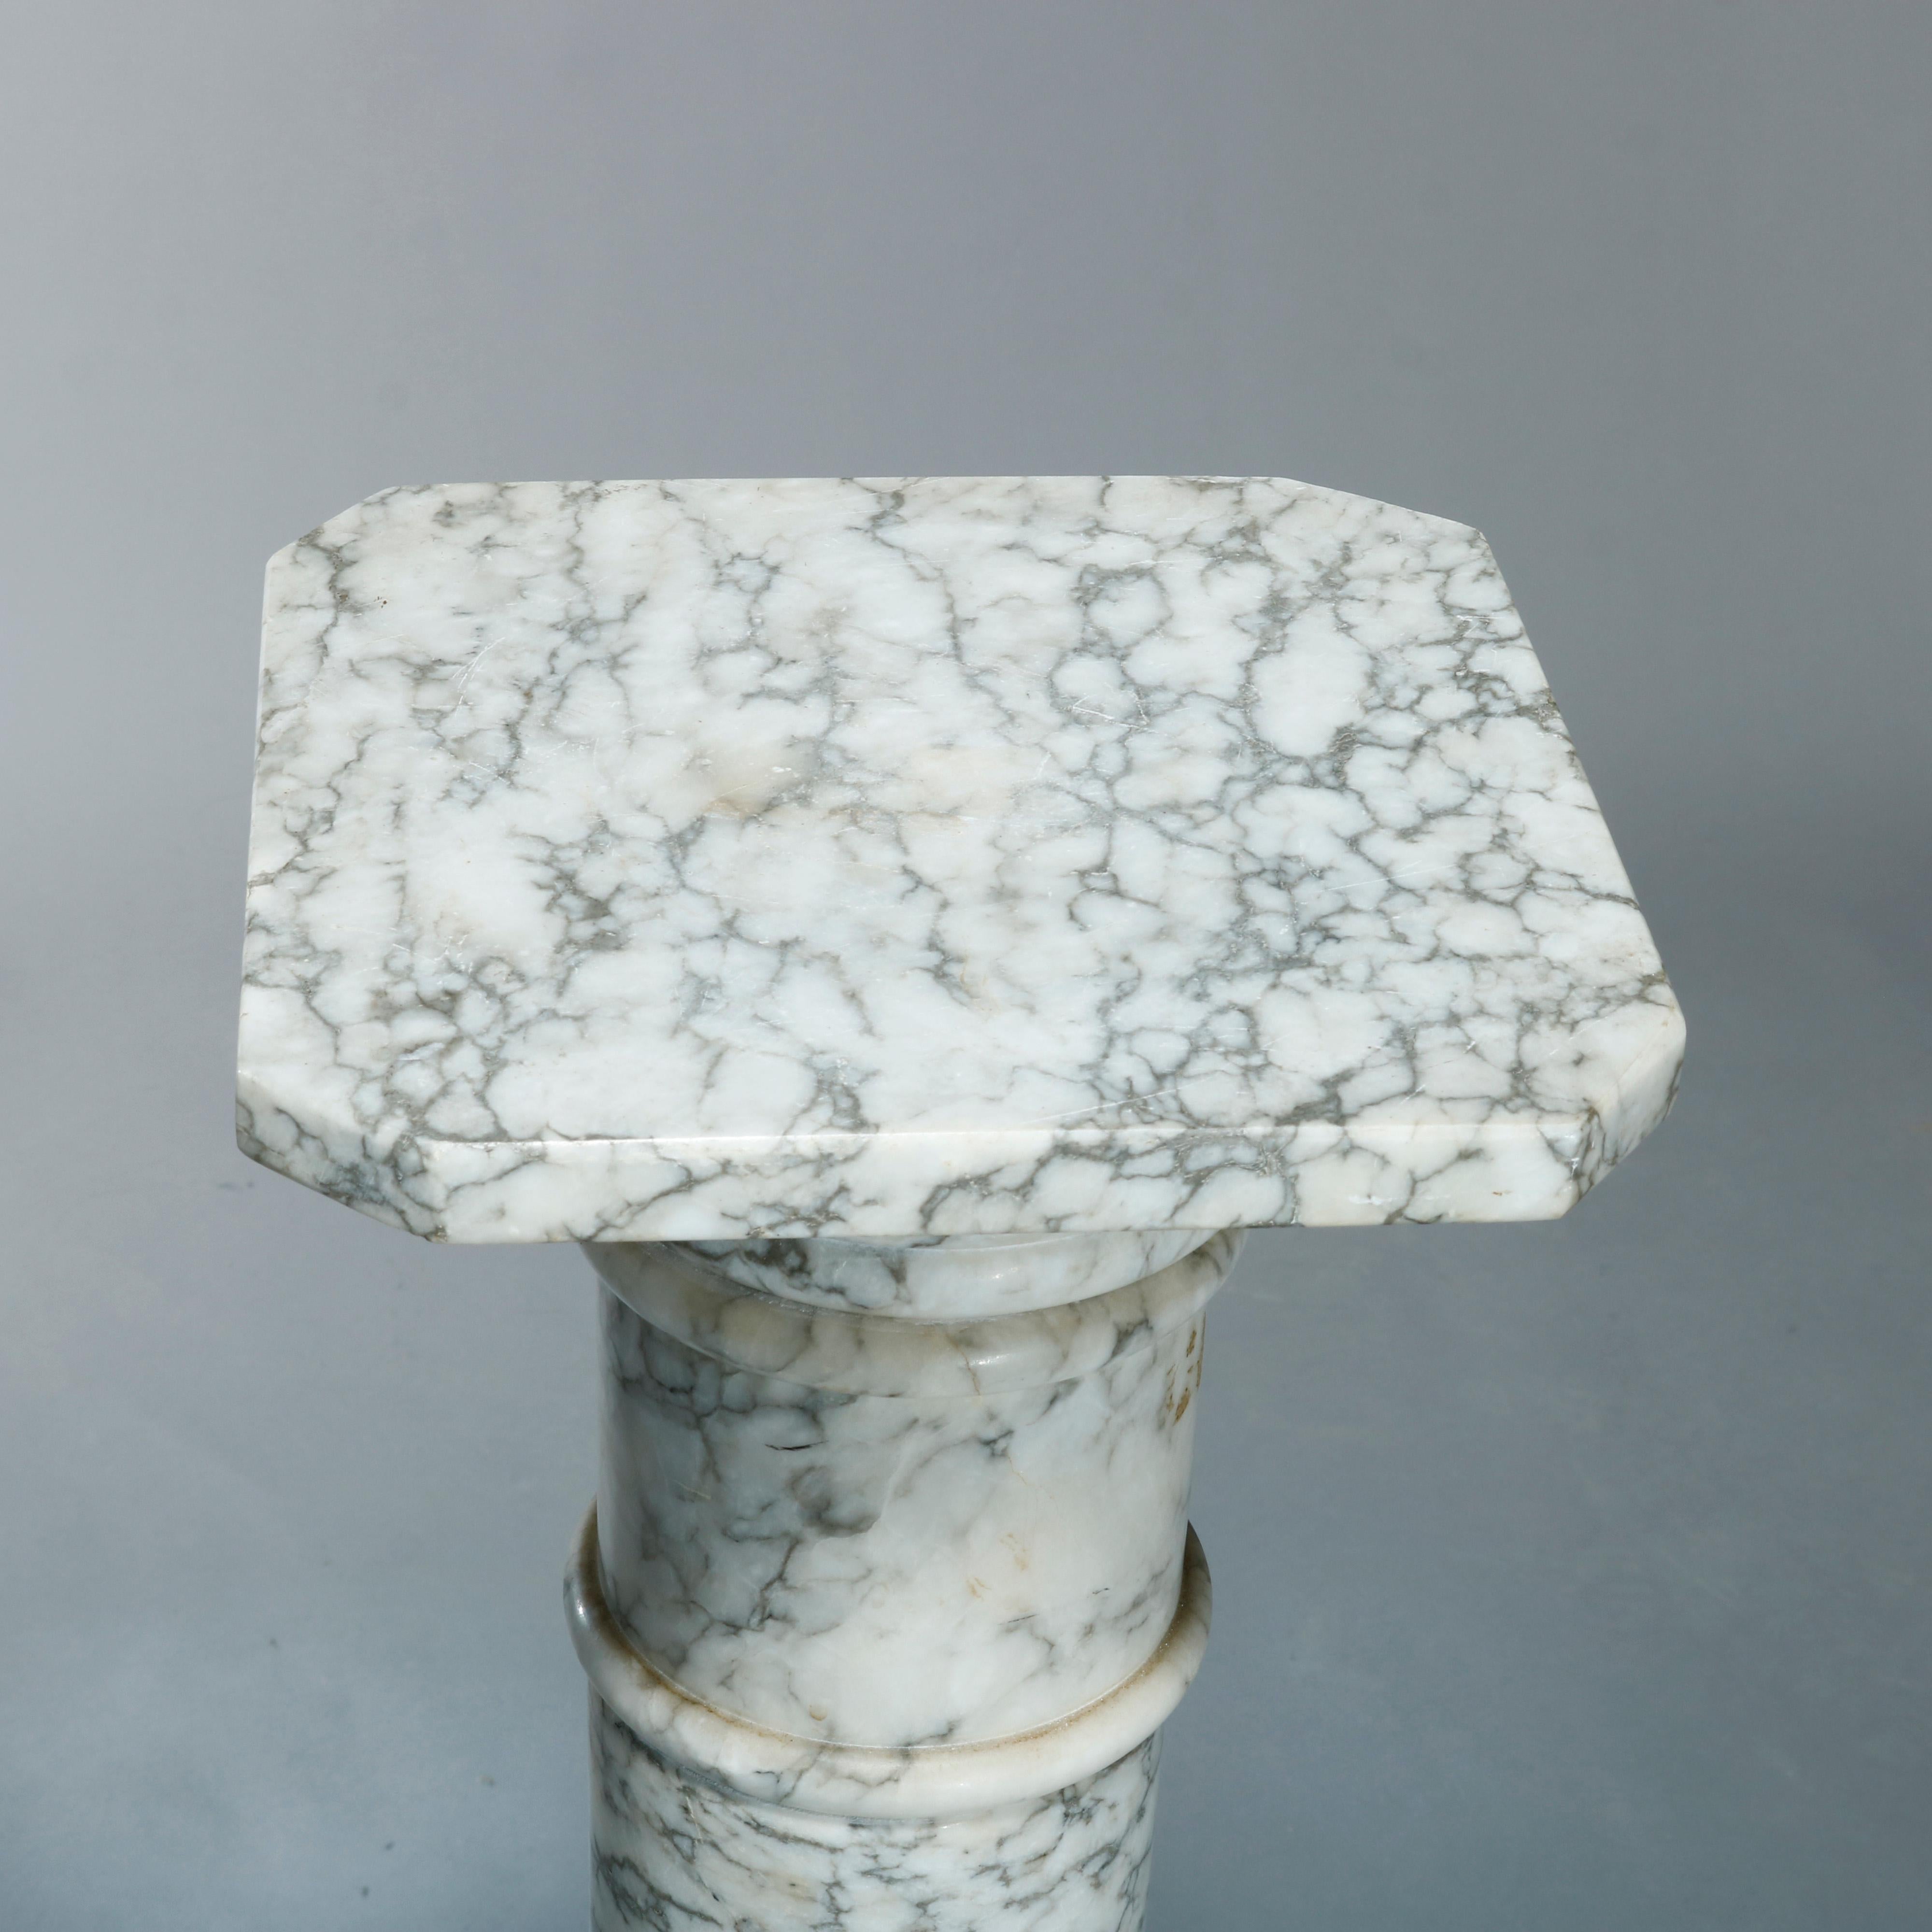 An antique neo-classical carved variegated marble display sculpture pedestal offers Doric column-form with clipped corner display and octagonal and stepped base, circa 1900.

Measures: 39.5